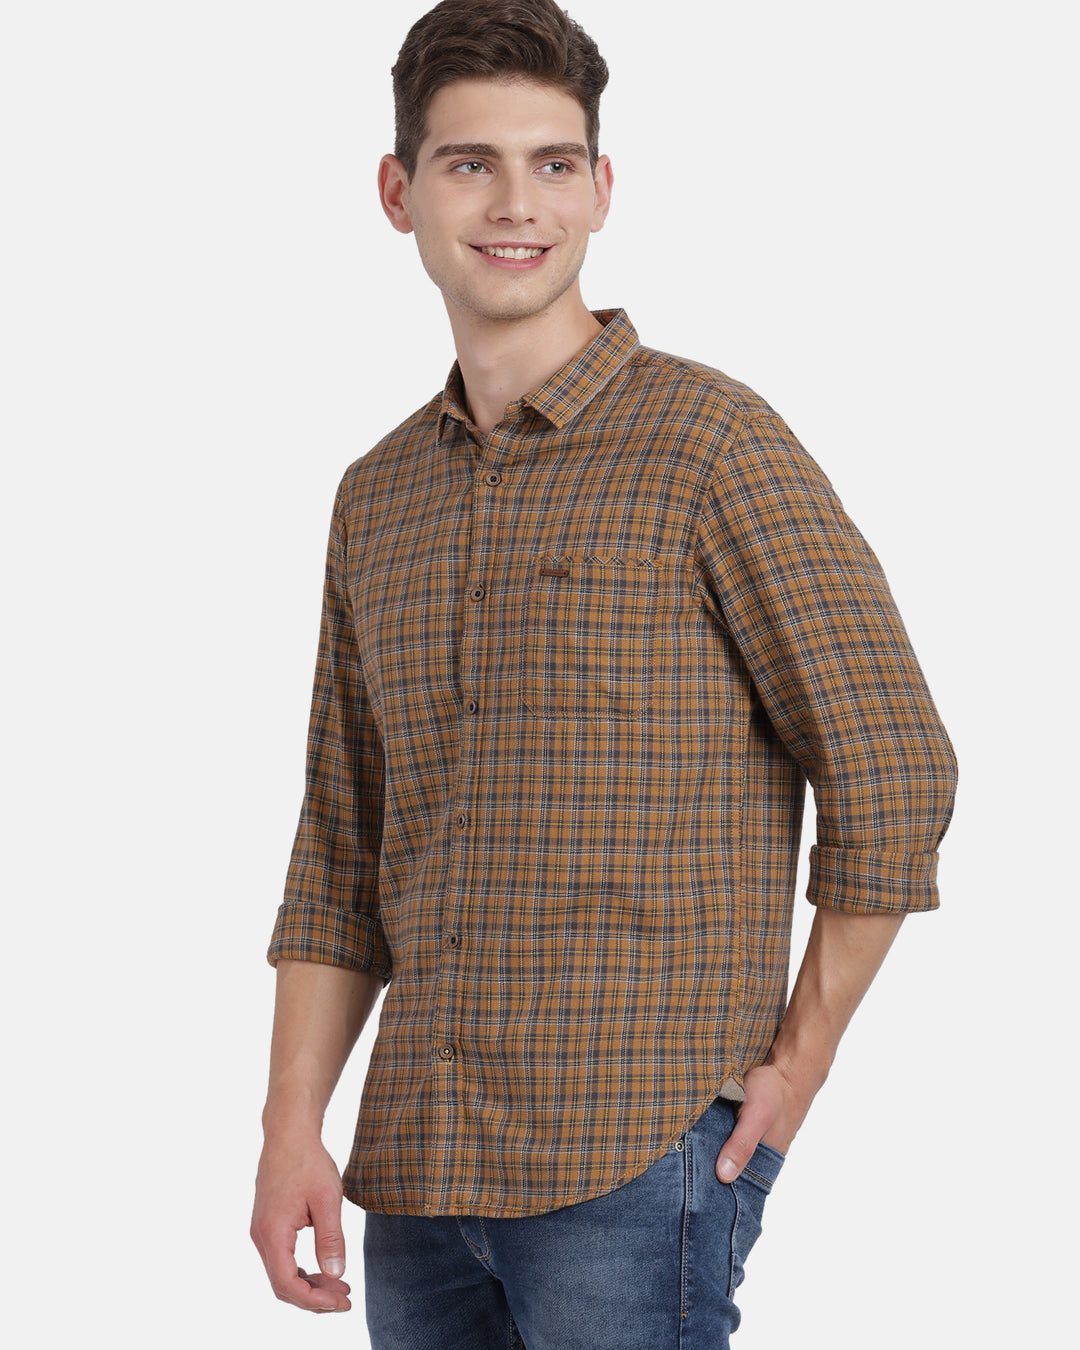 Crocodile Men's Casual Full Sleeve Slim Fit Checks Brown With Collar Shirt Online